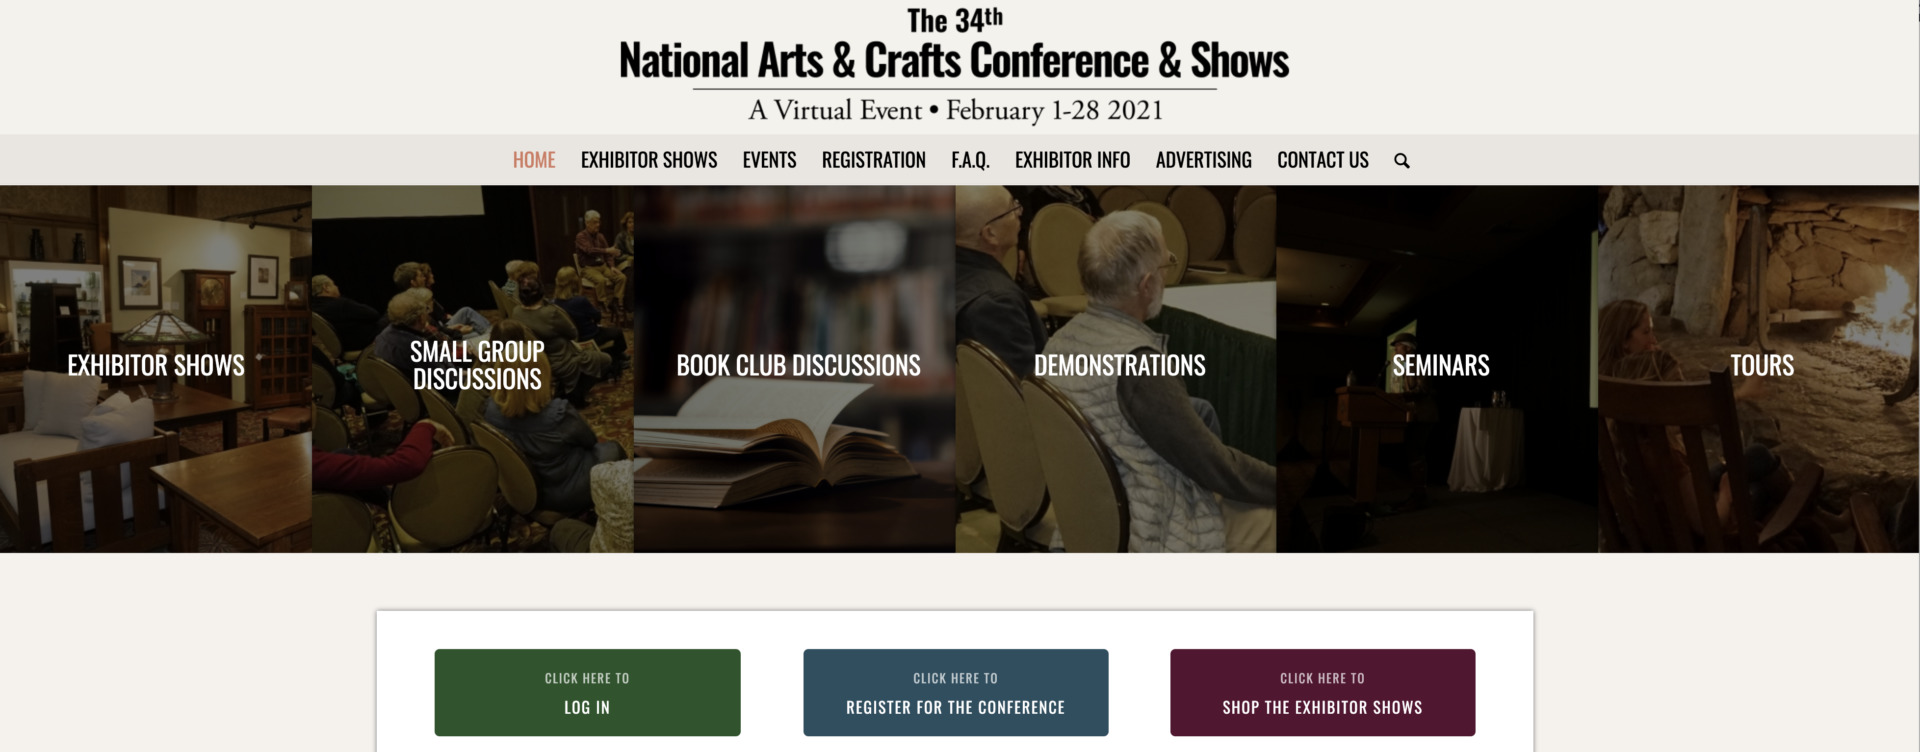 34th National Arts and Crafts Conference Goes Virtual With A New